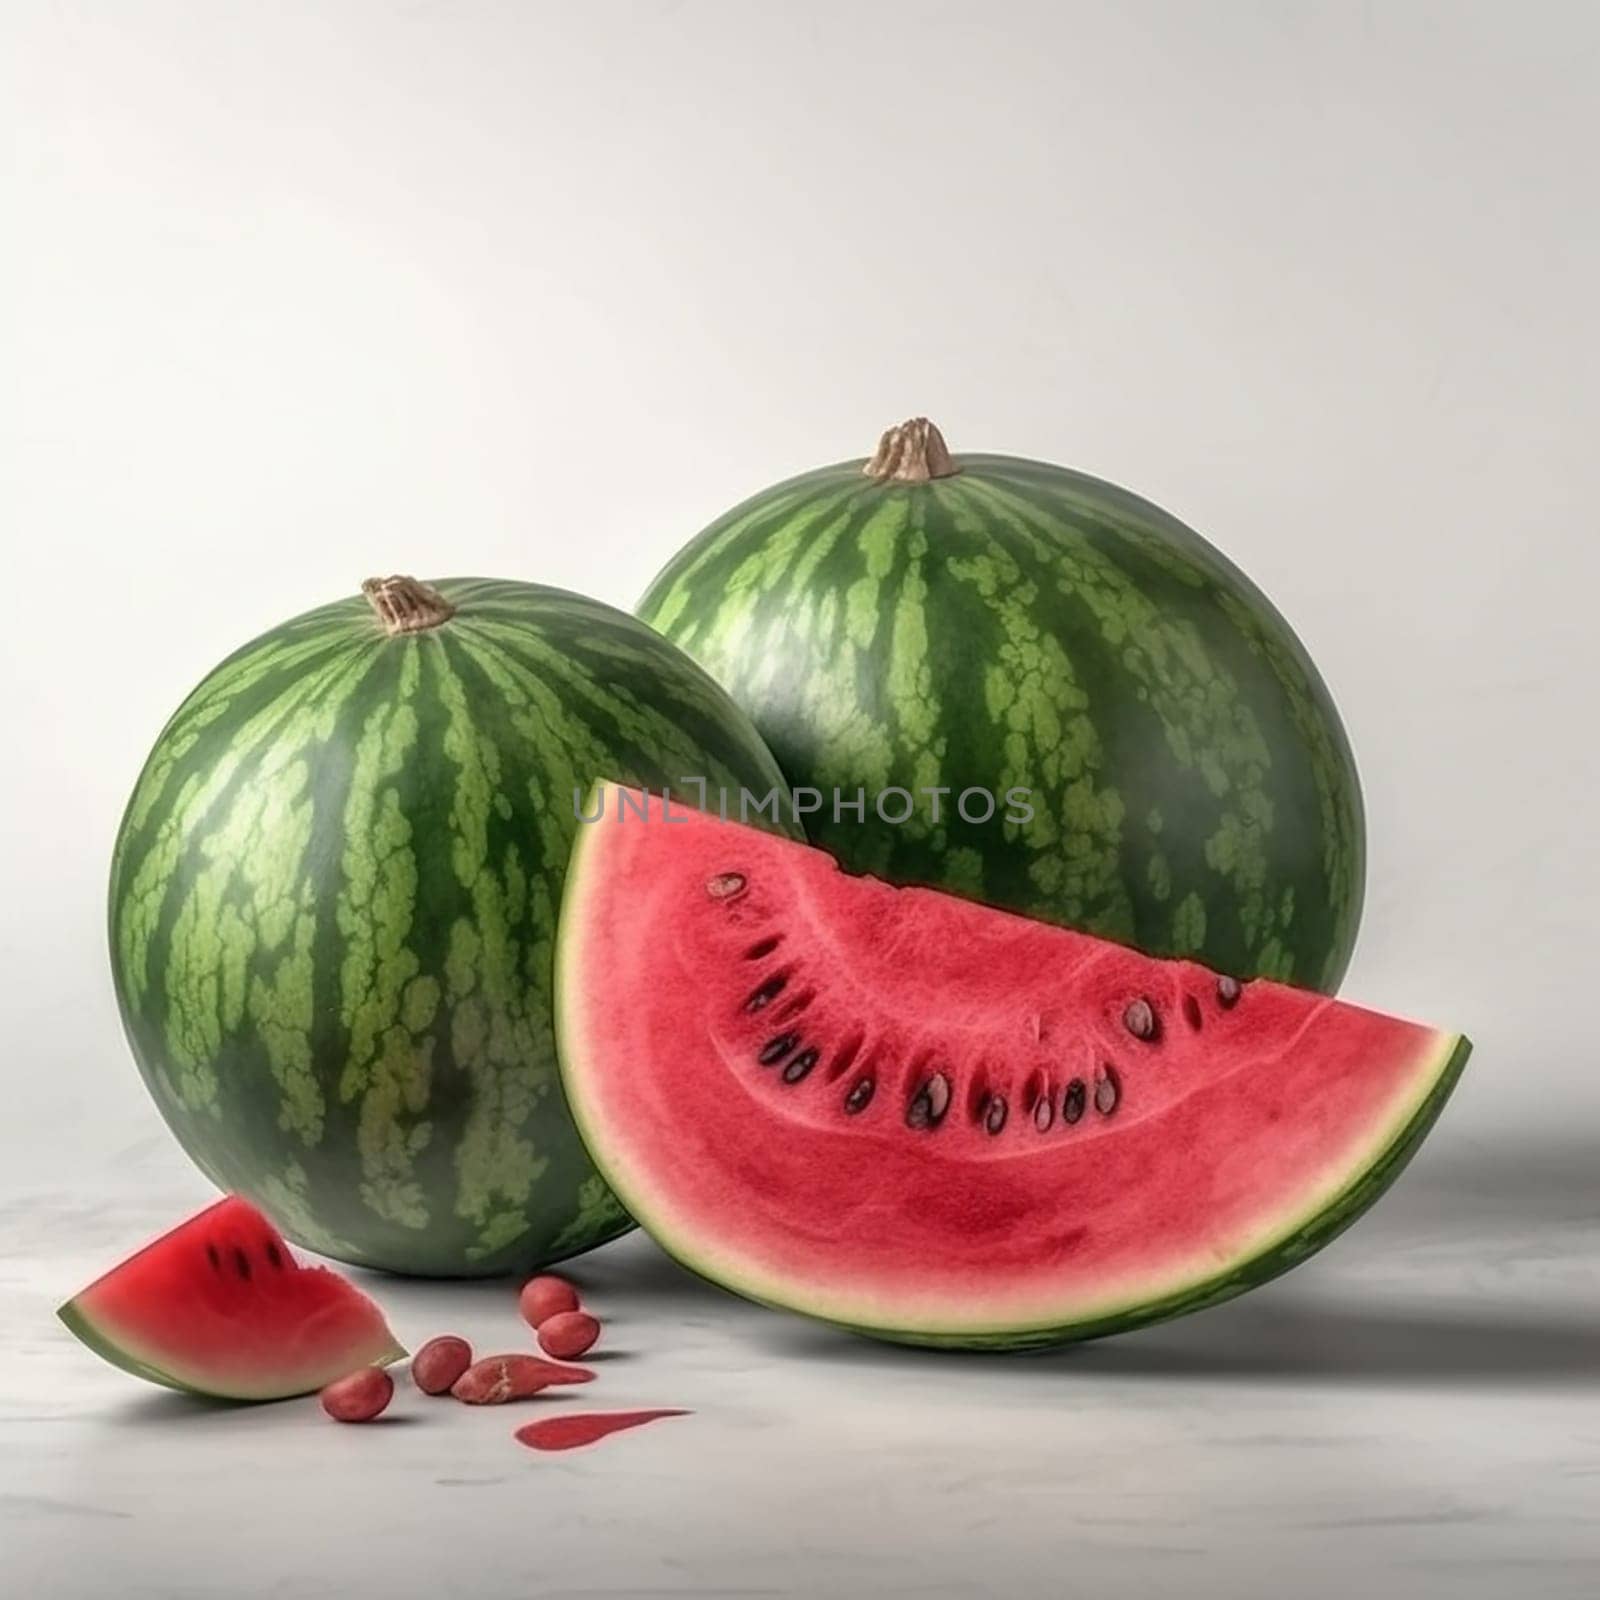 Two whole watermelons and a juicy slice with seeds